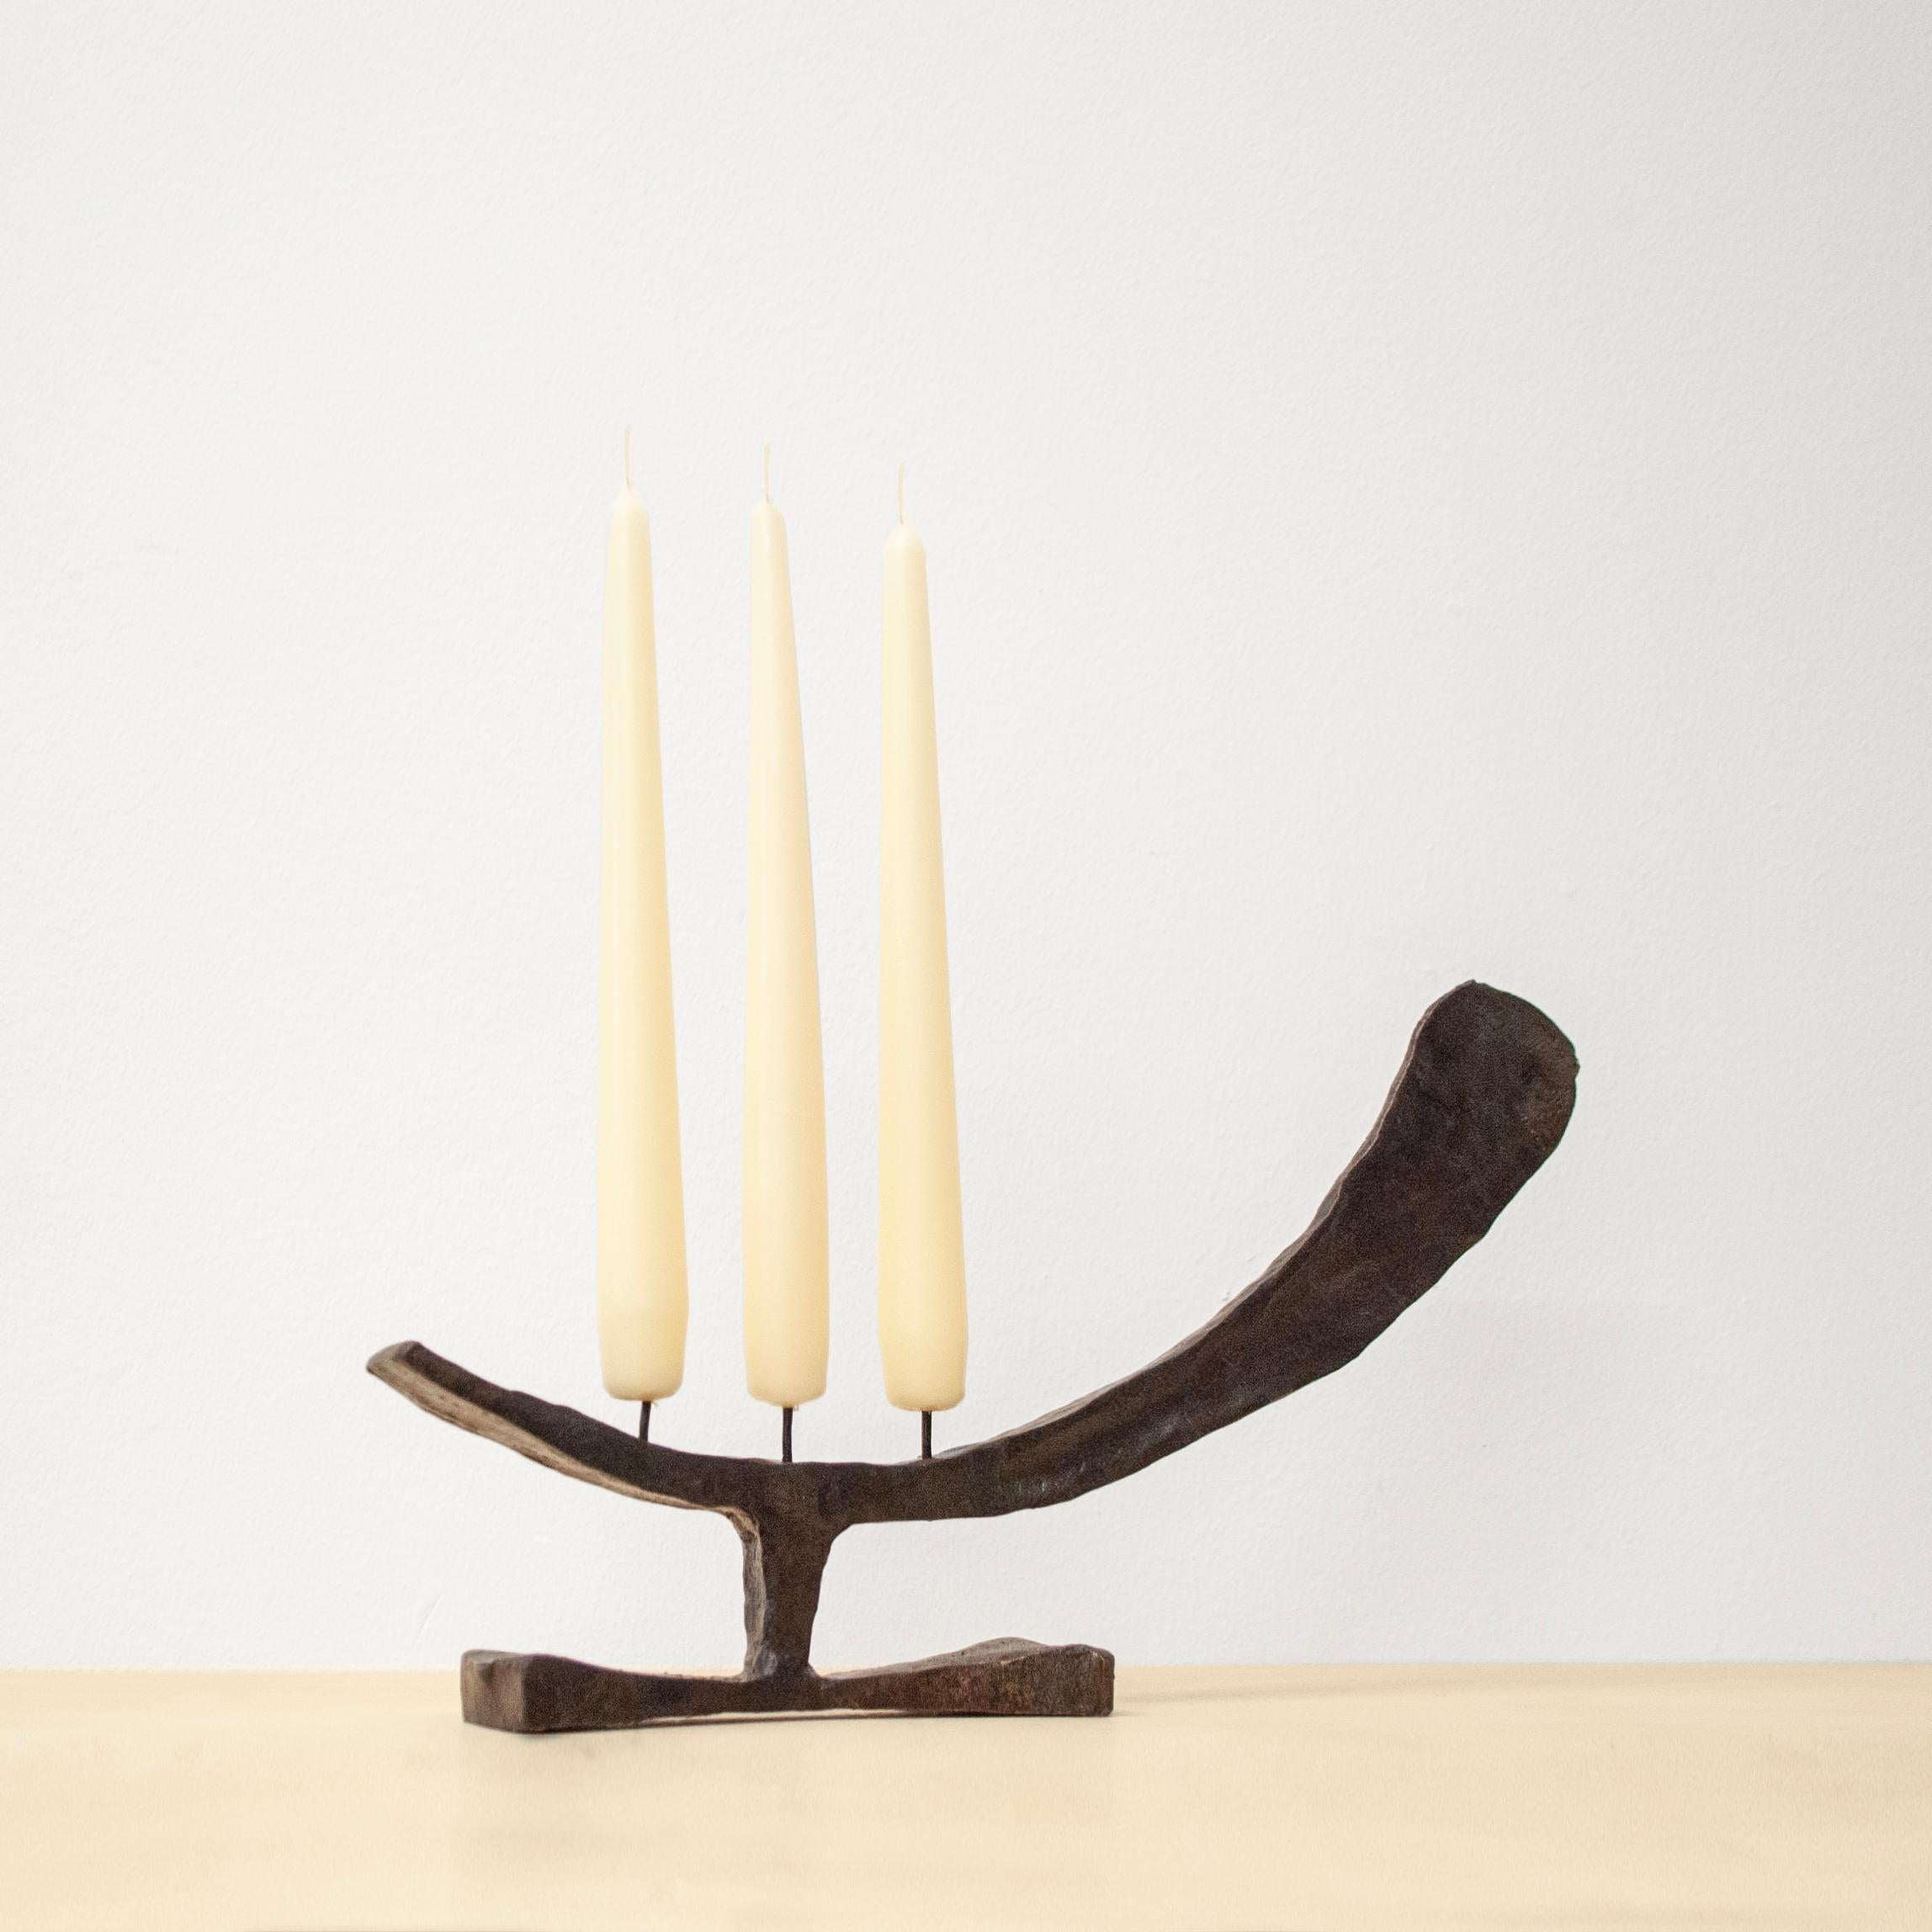 A forged steel candleholder inspired by Harry Bertoia. A tapered steel form sits horizontally, bowed and raised up on a base. The tapered form is forged from one piece of steel tapering in 2 directions to allow for an interesting profile and a flat